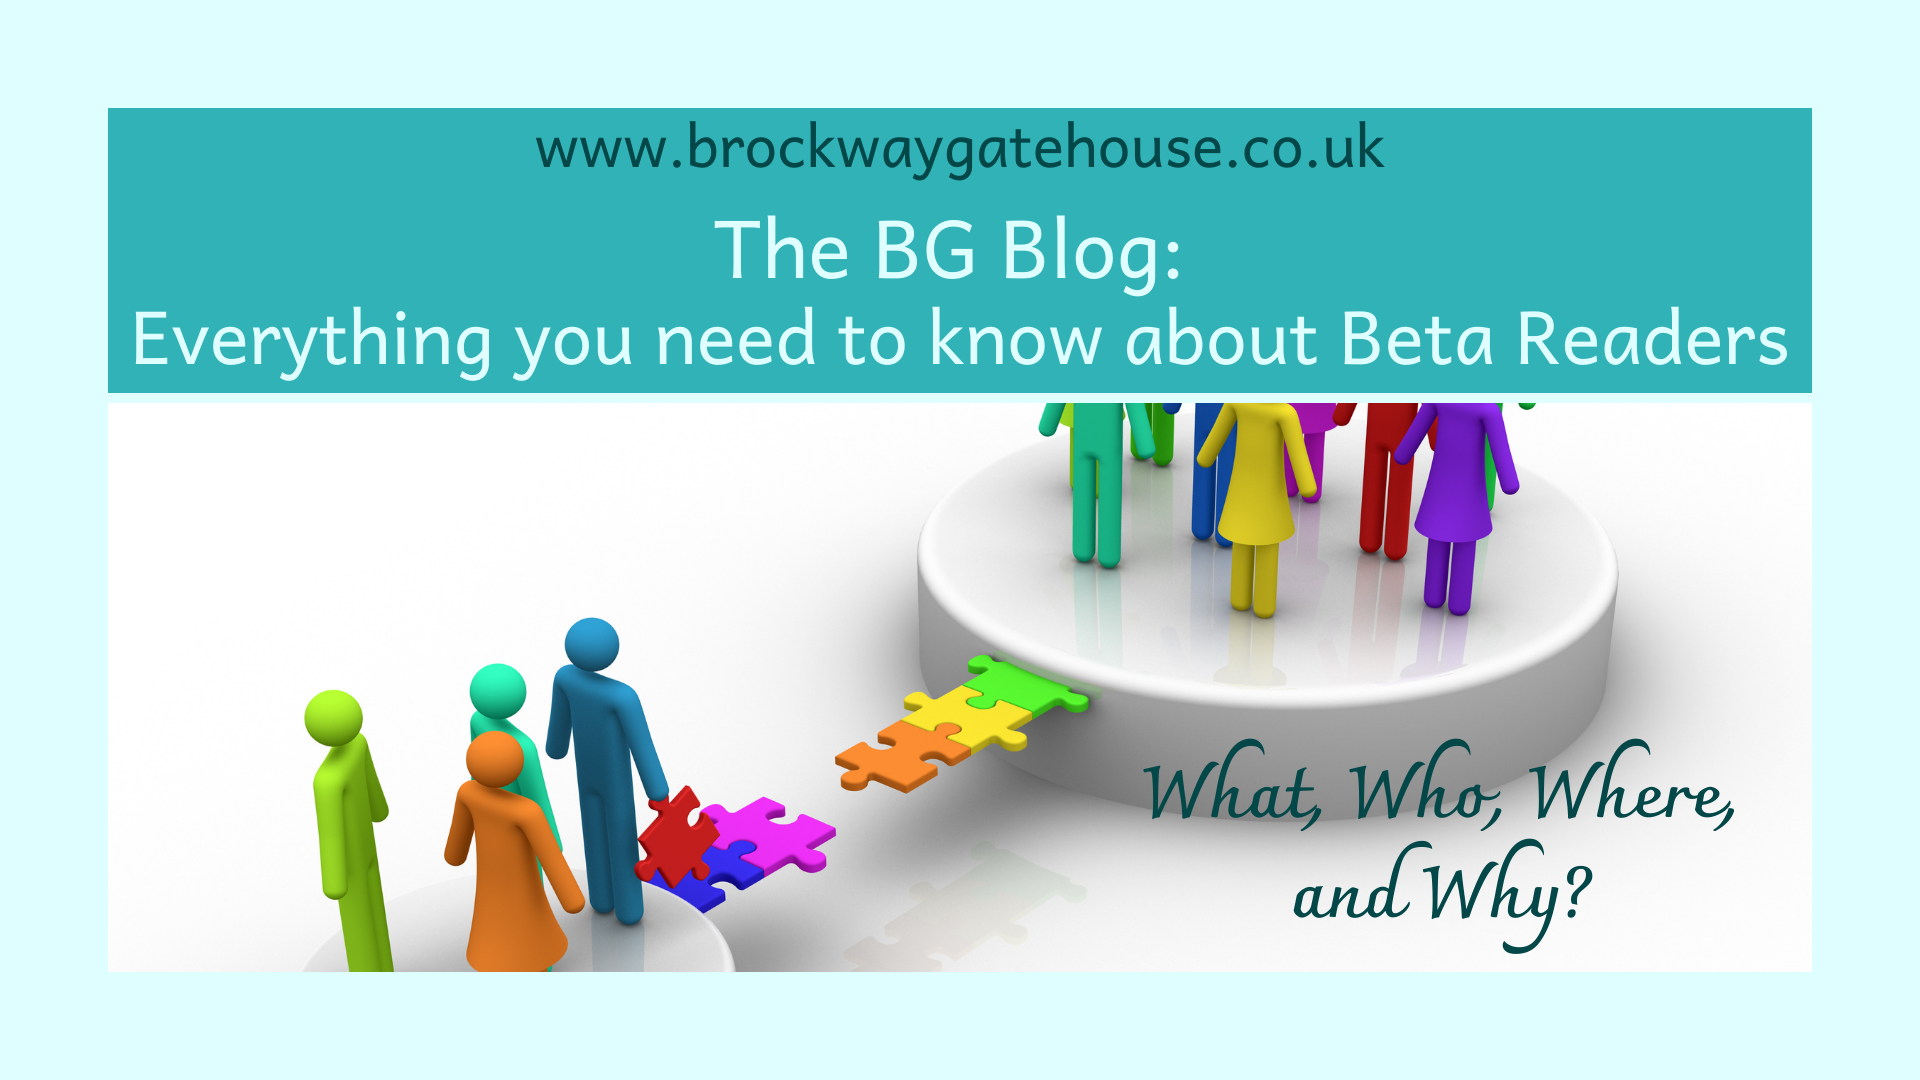 Everything you need to know about Beta Readers: What, Who, Where, and Why?